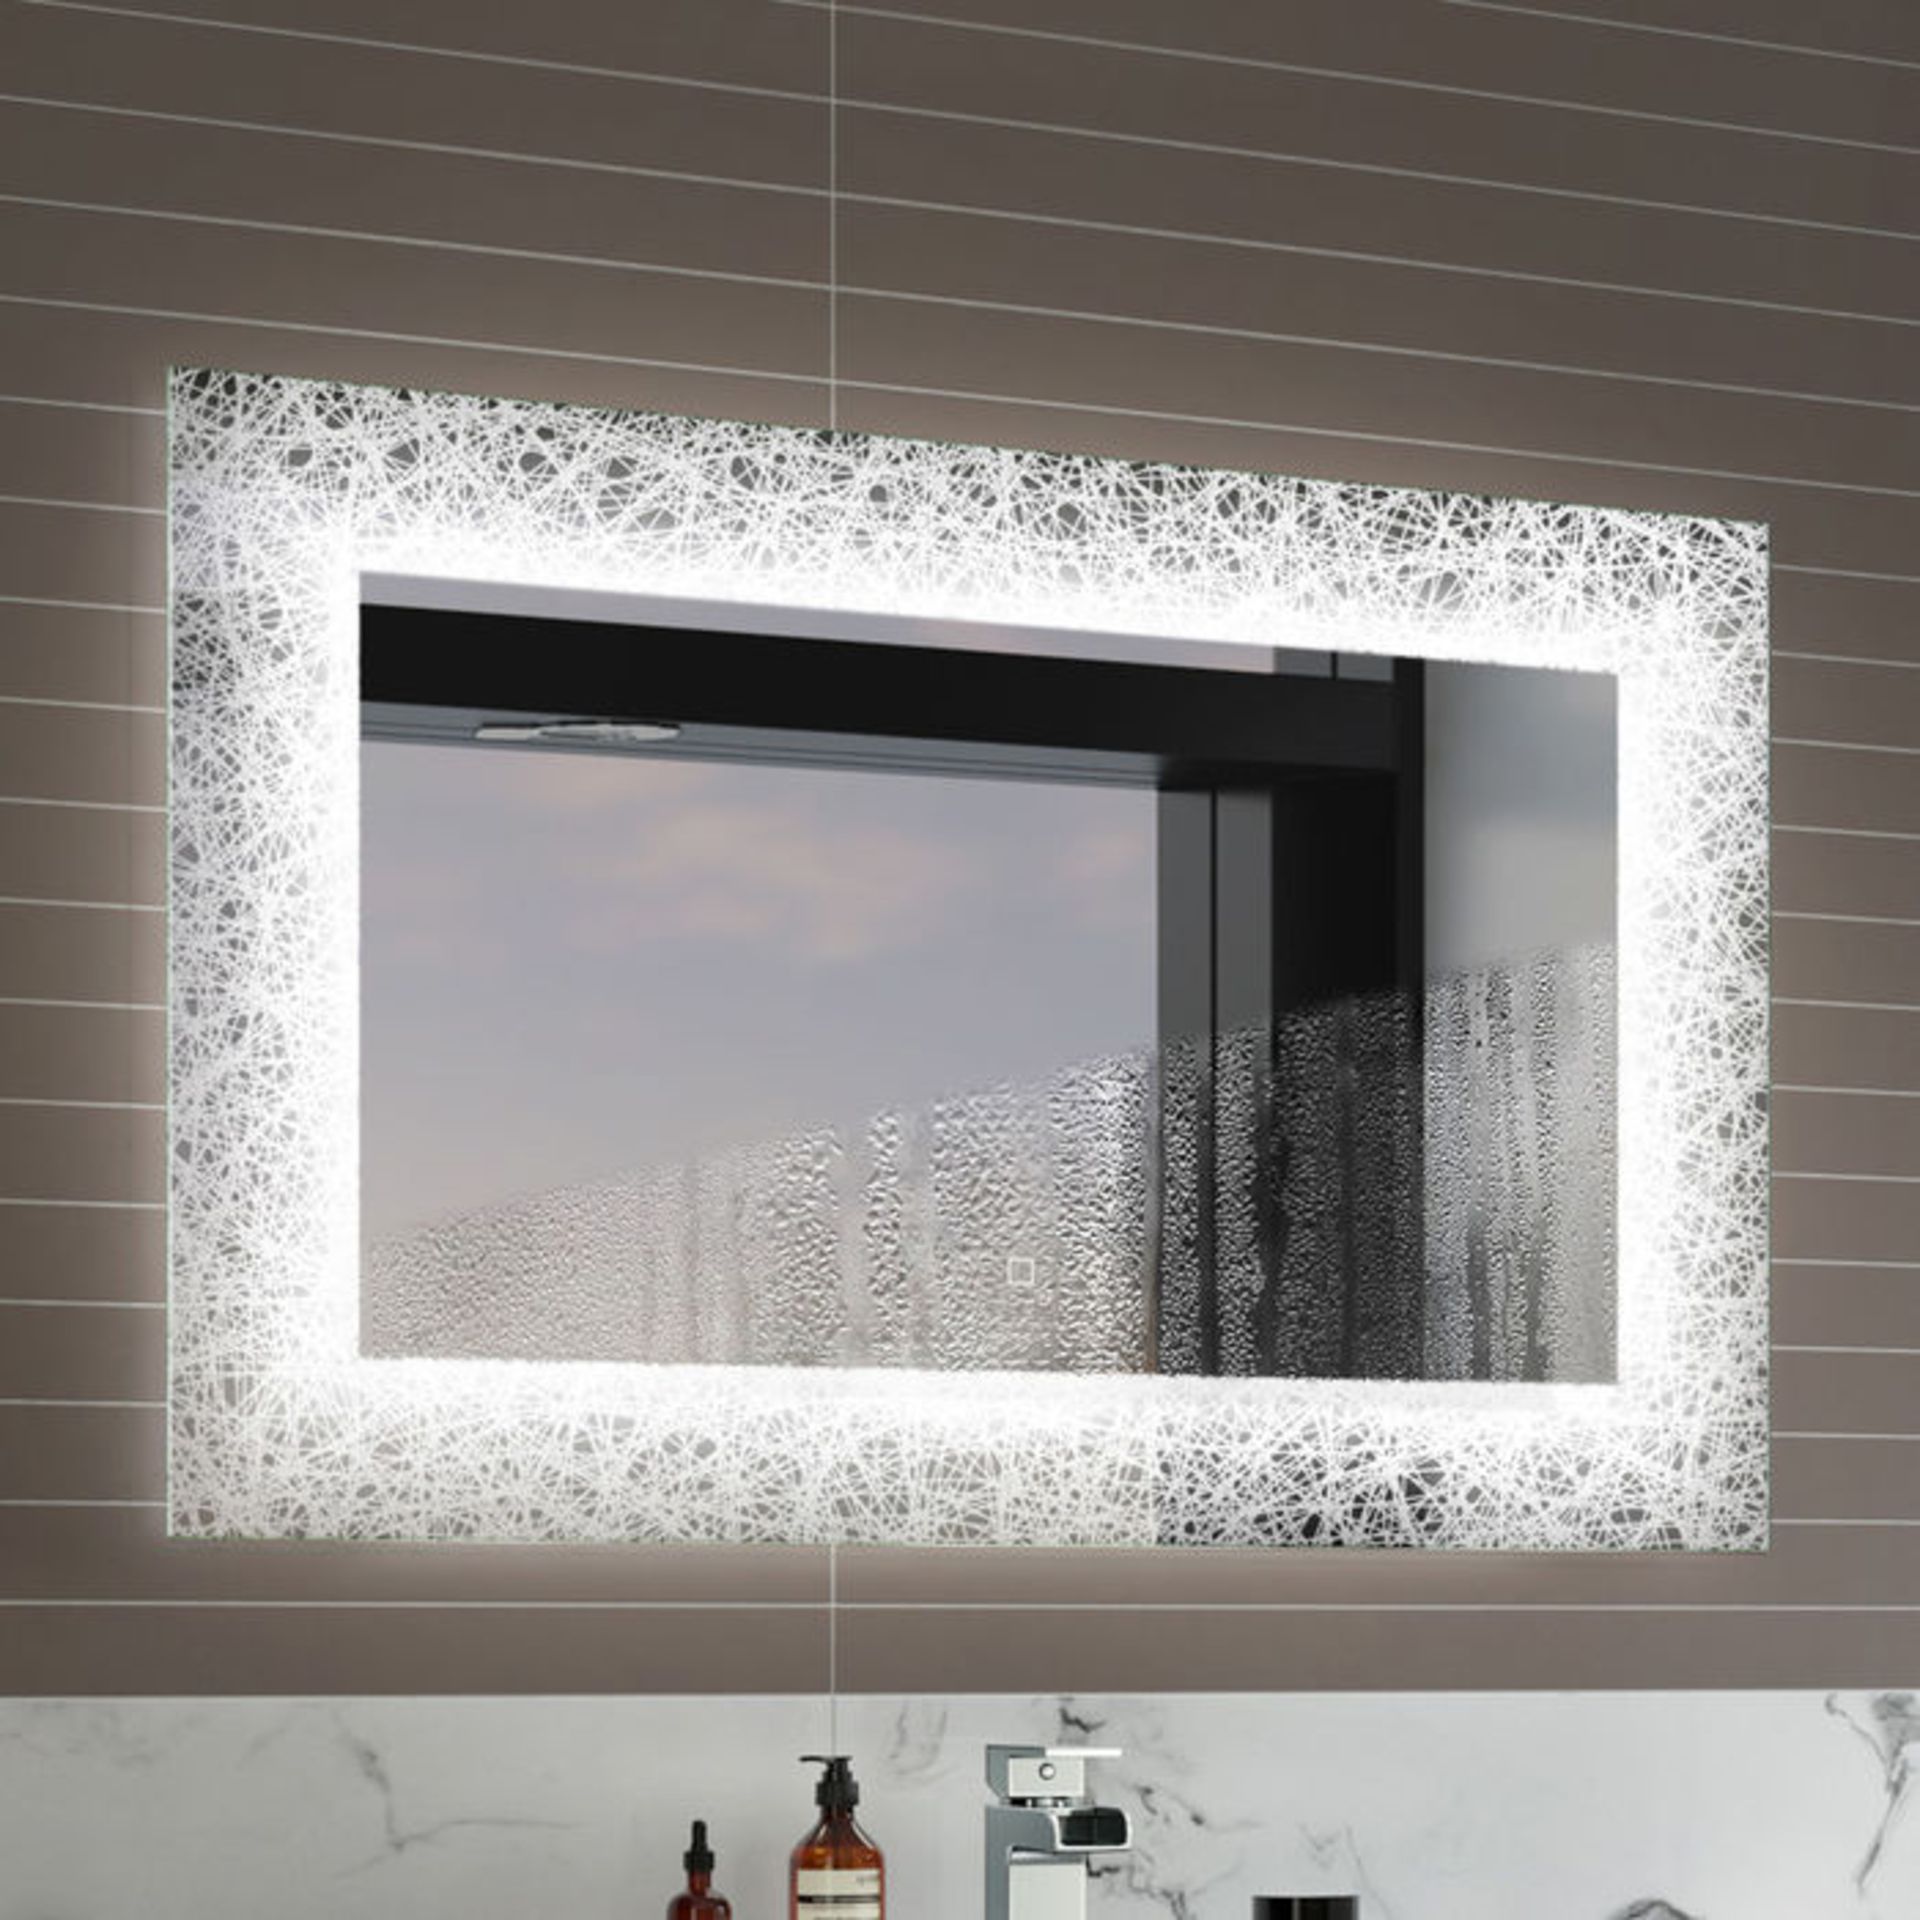 (Y206) 600x900mm Celestial Designer Illuminated LED Mirror - Switch Control. RRP £349.99. We love - Image 3 of 4